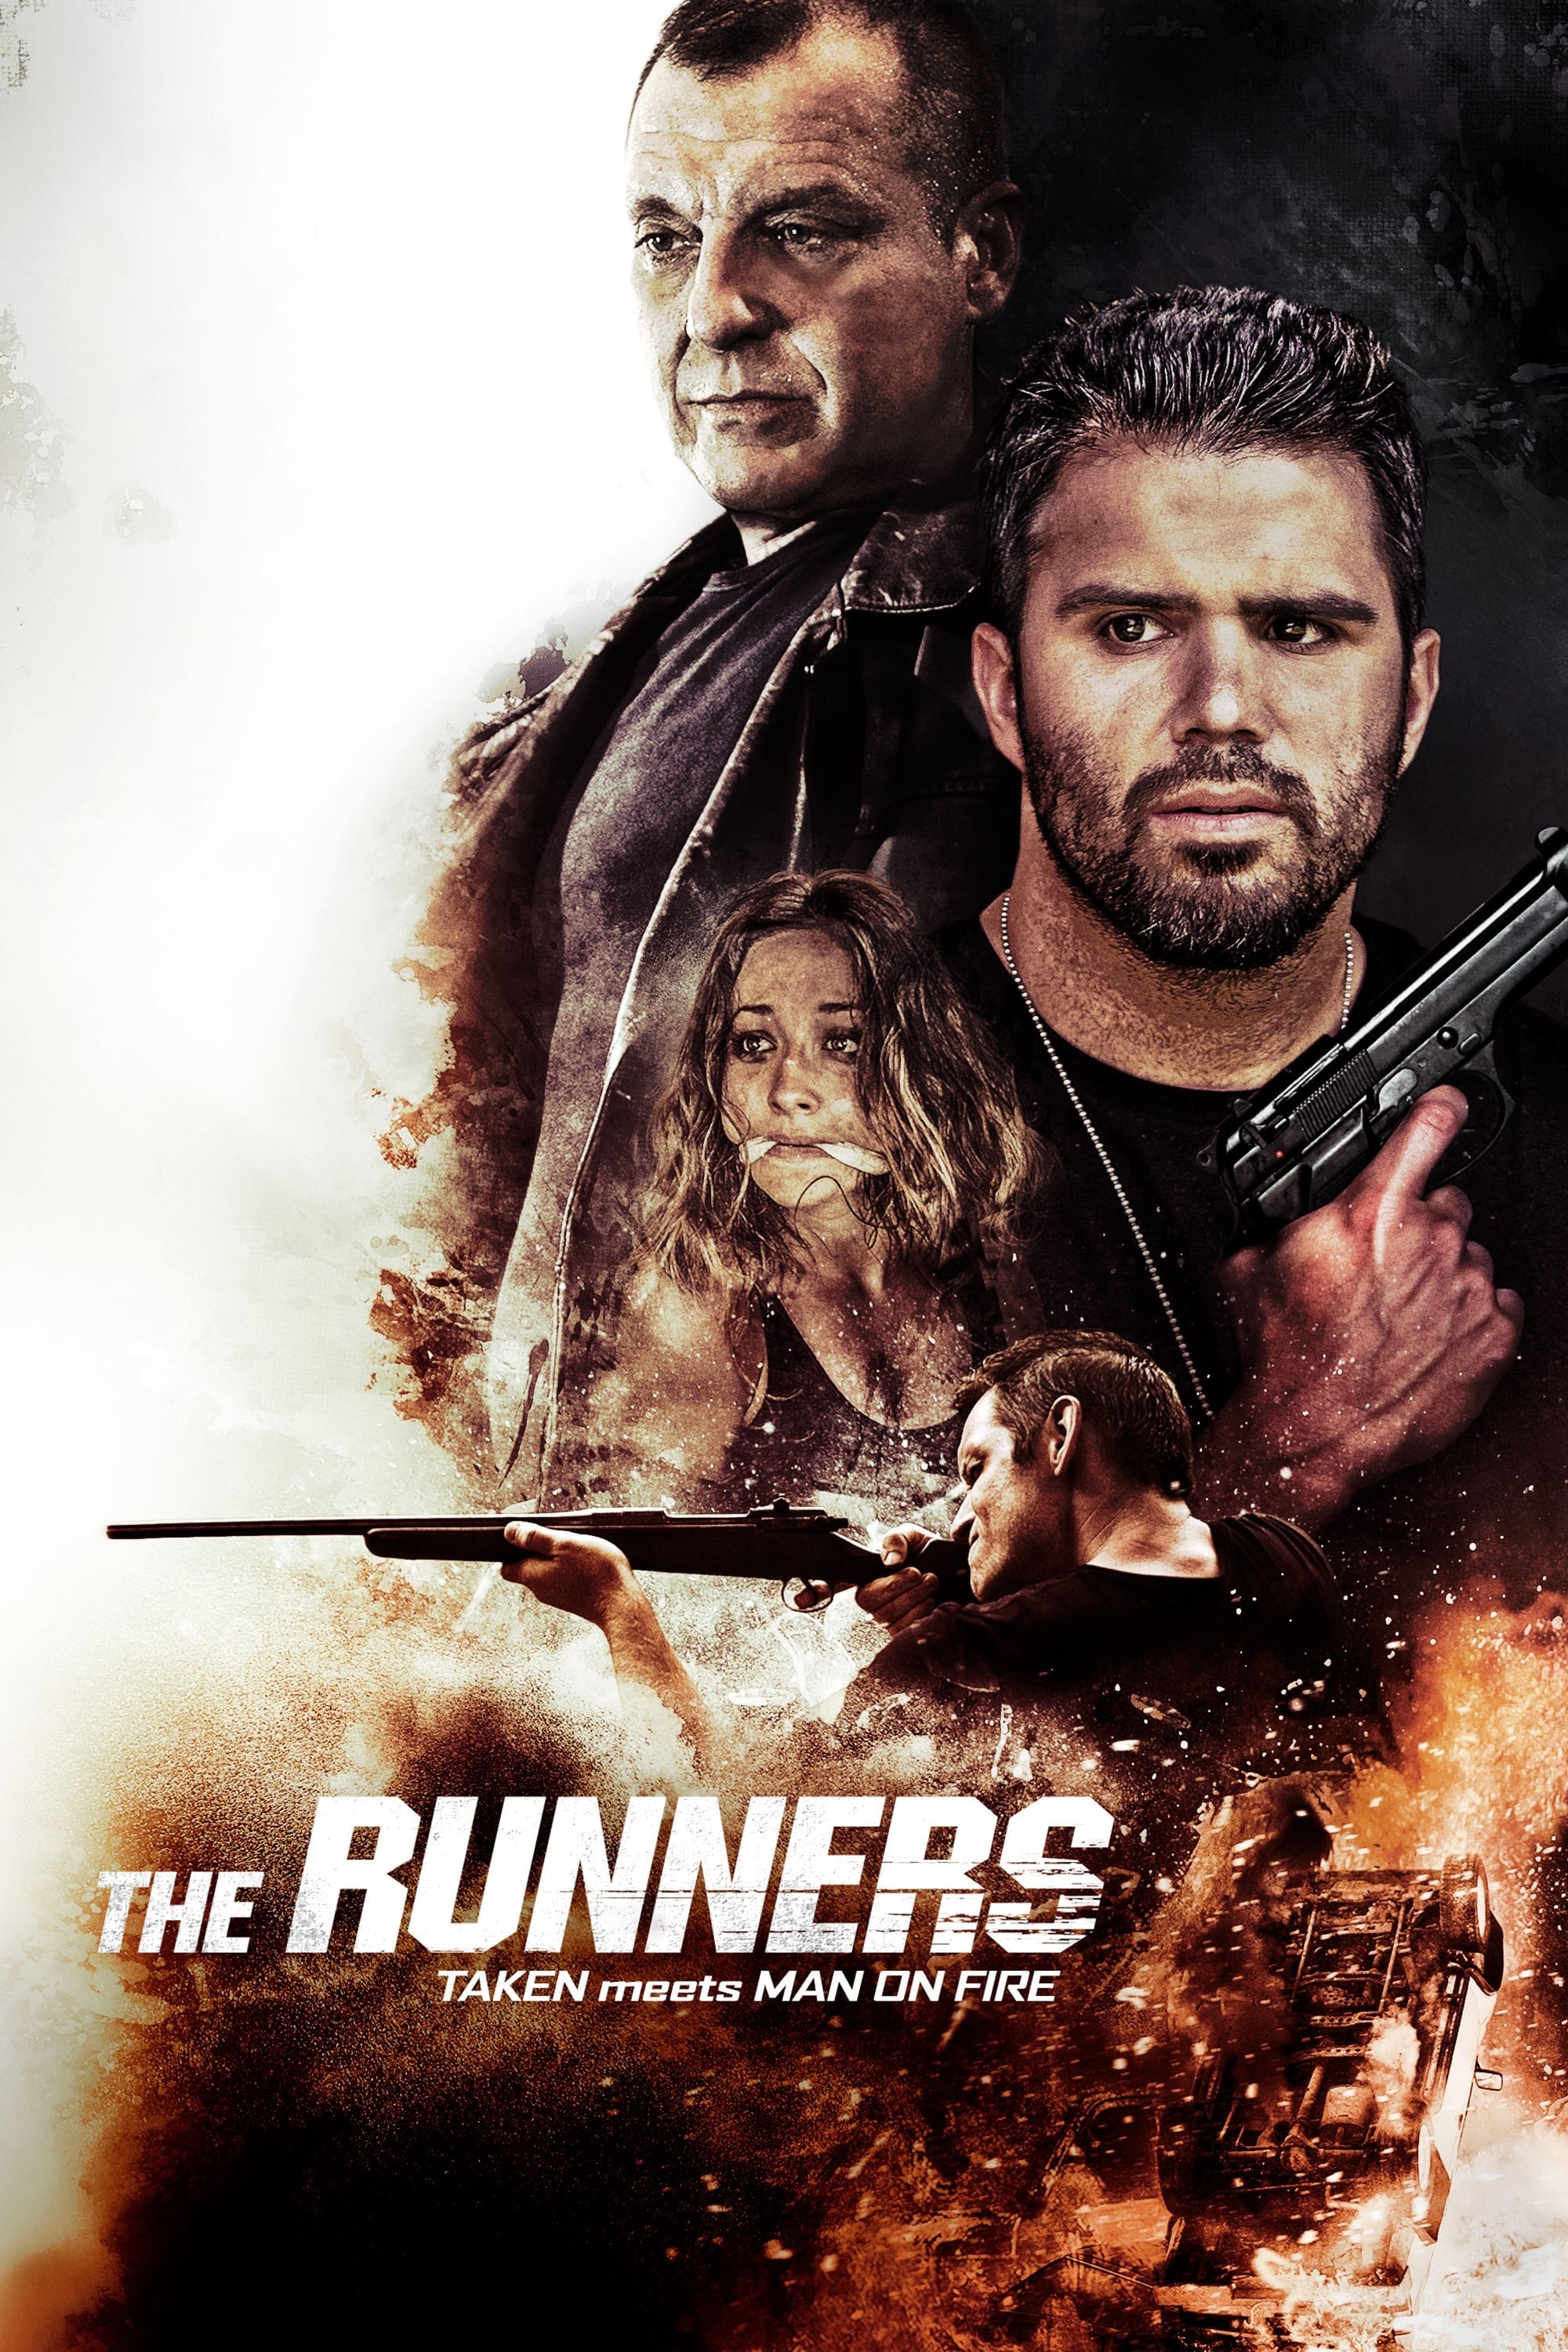 The Runners (2020)